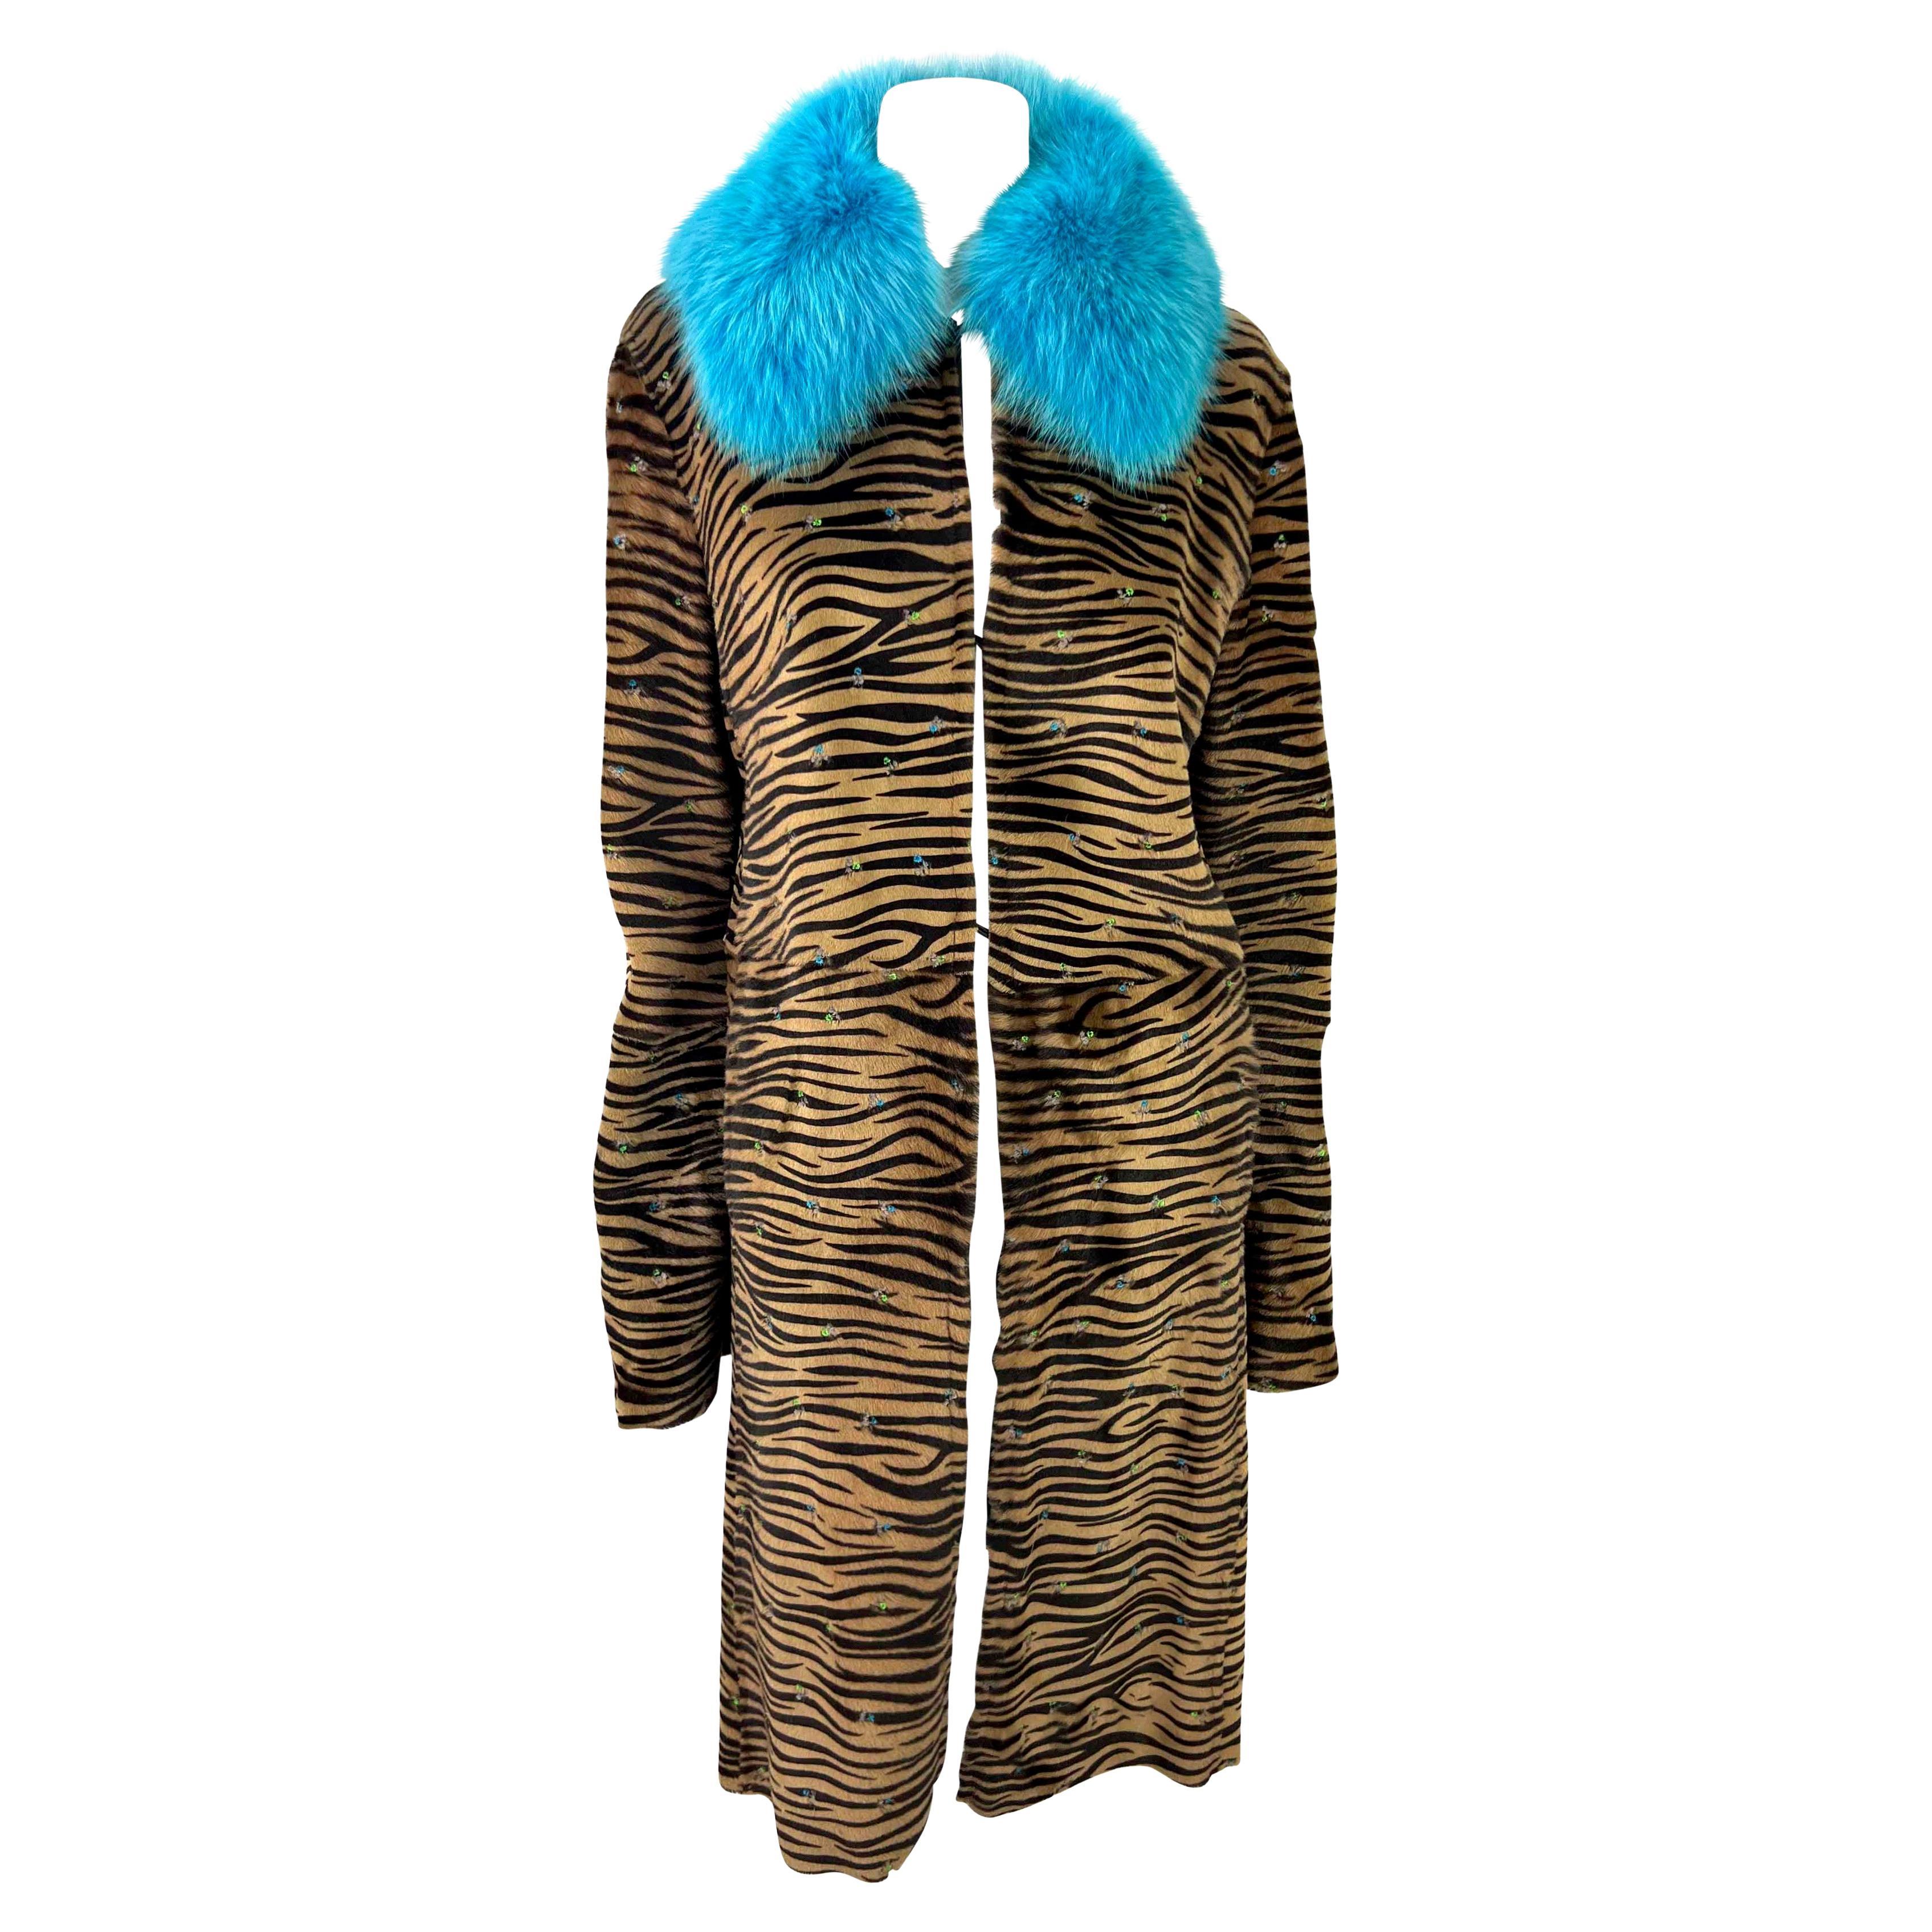 F/W 1999 Gianni Versace by Donatella Embroidered Pony Hair Blue Fox Fur Coat For Sale